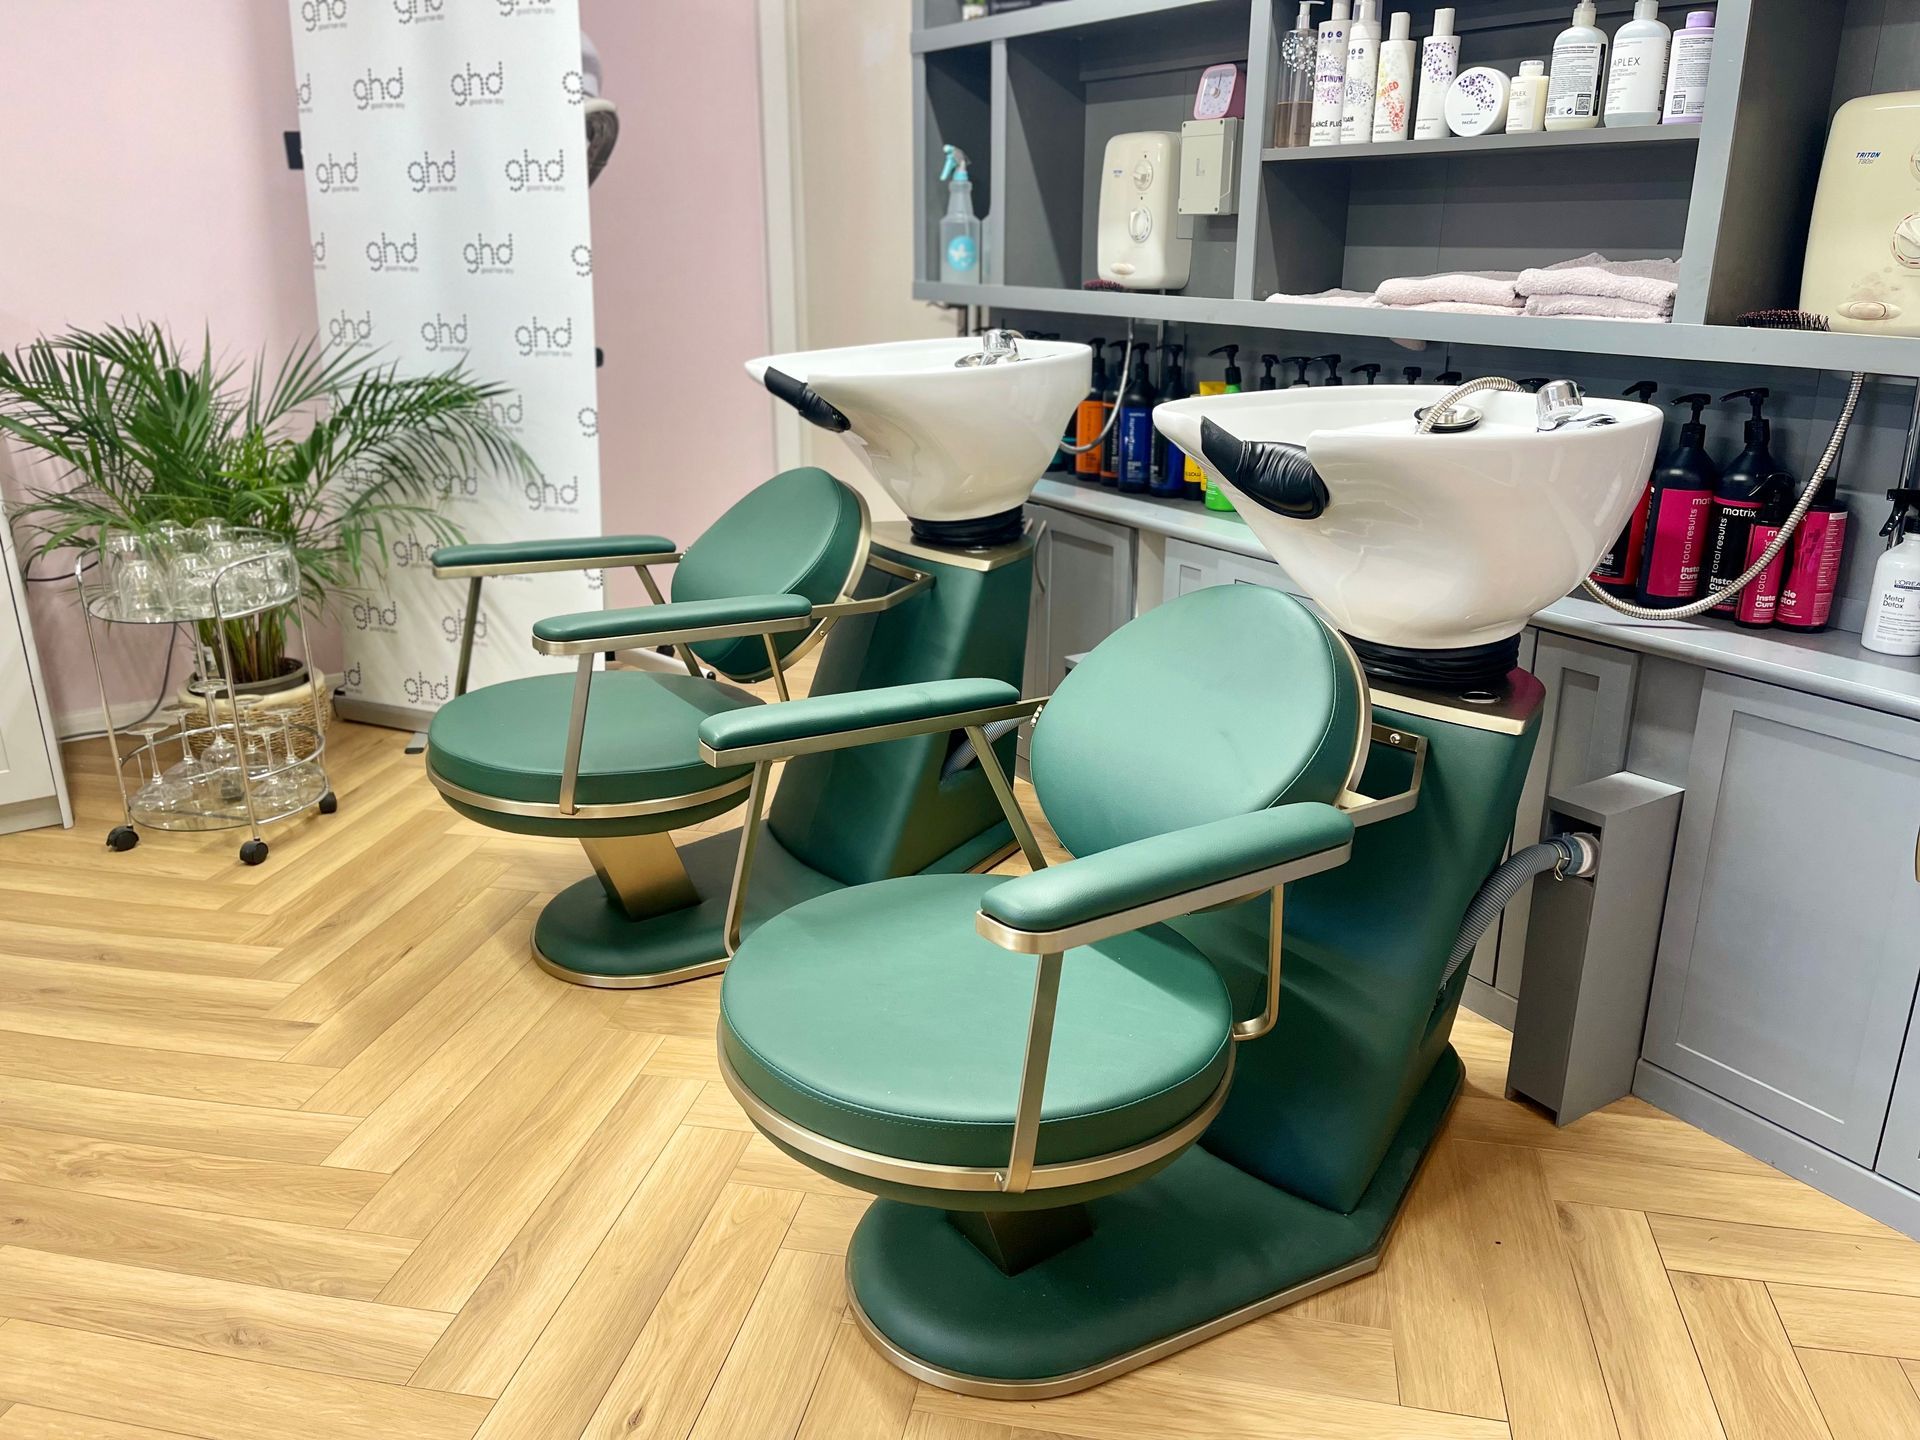 Hairdresser chairs and wash basin with multiple hair wash products